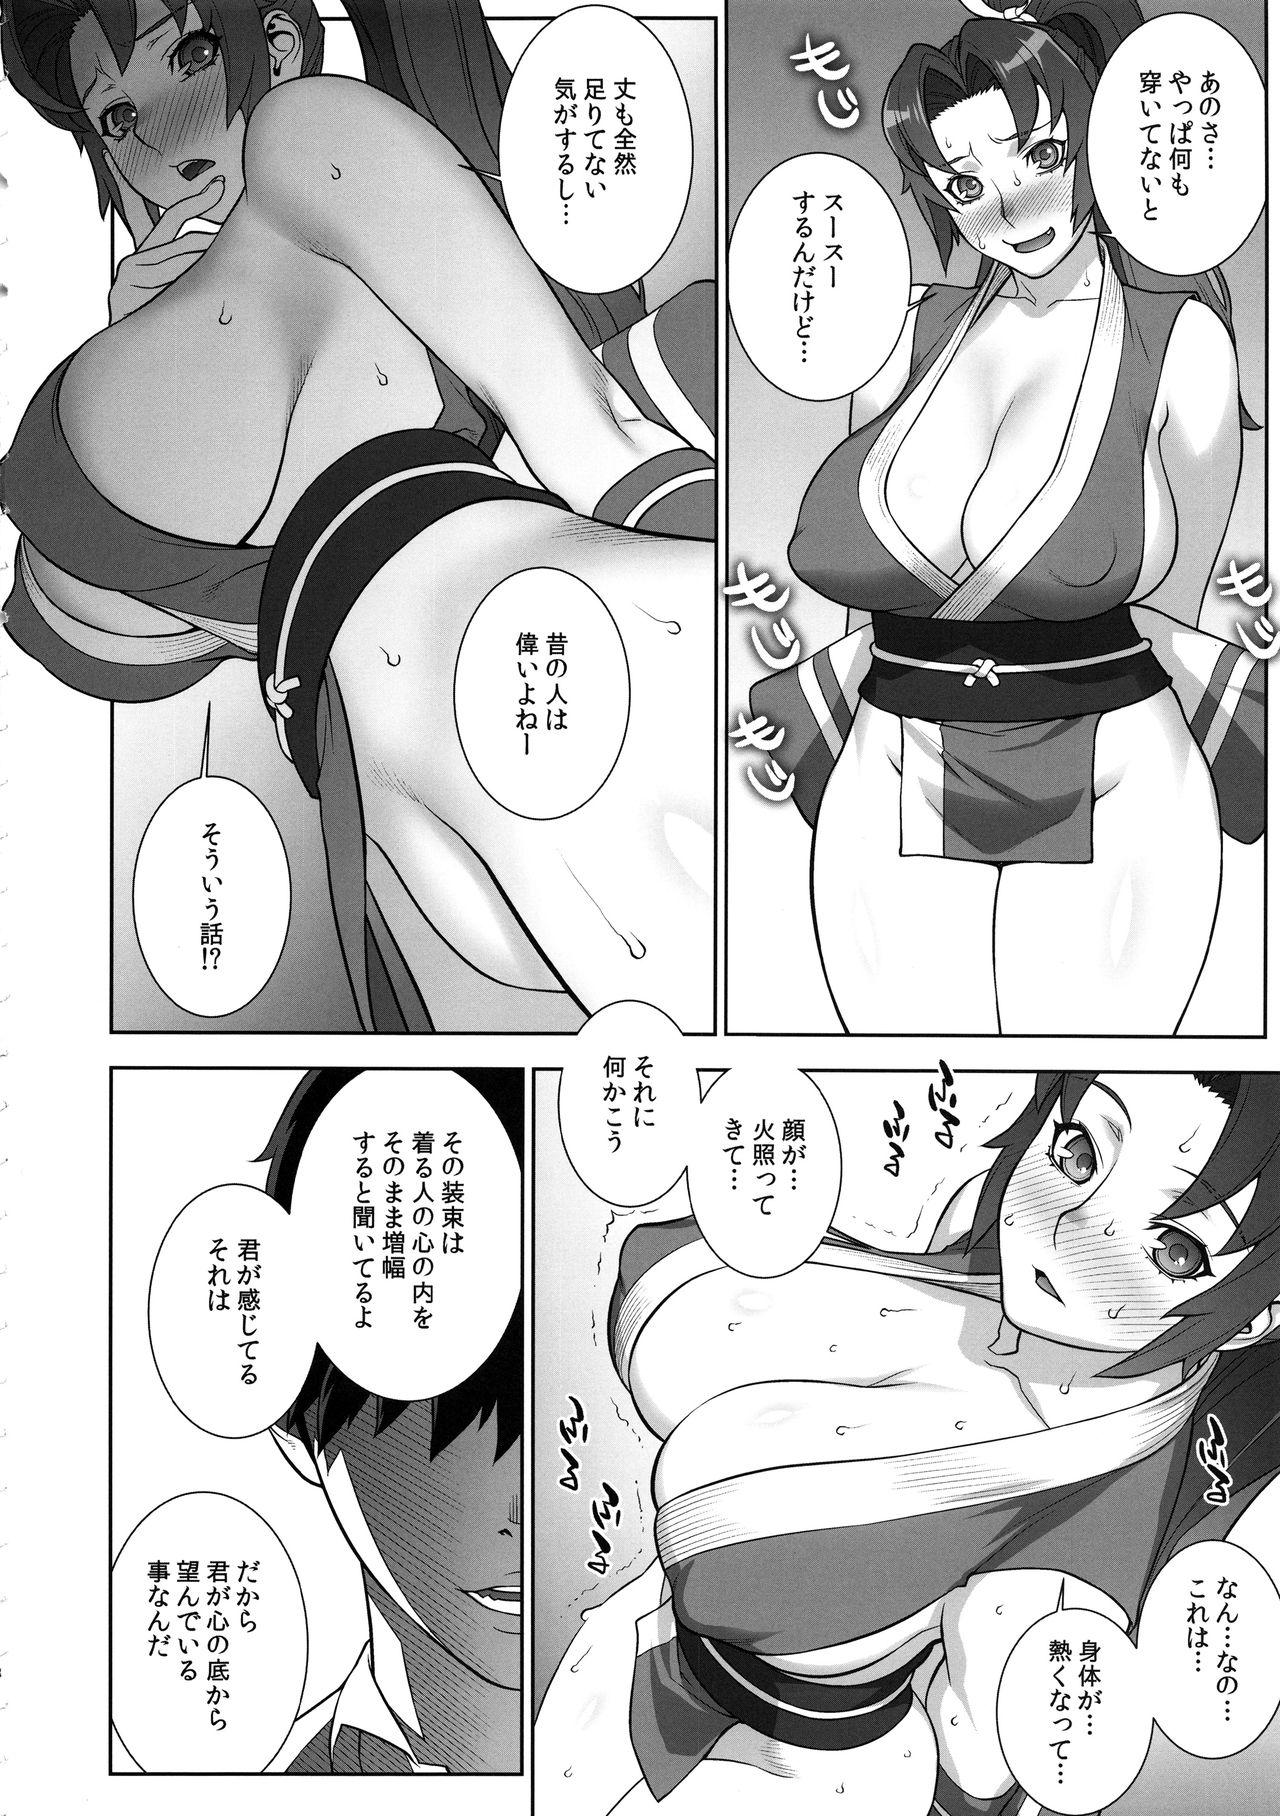 Bigtits Domidare Kachousen - King of fighters Prostitute - Page 7